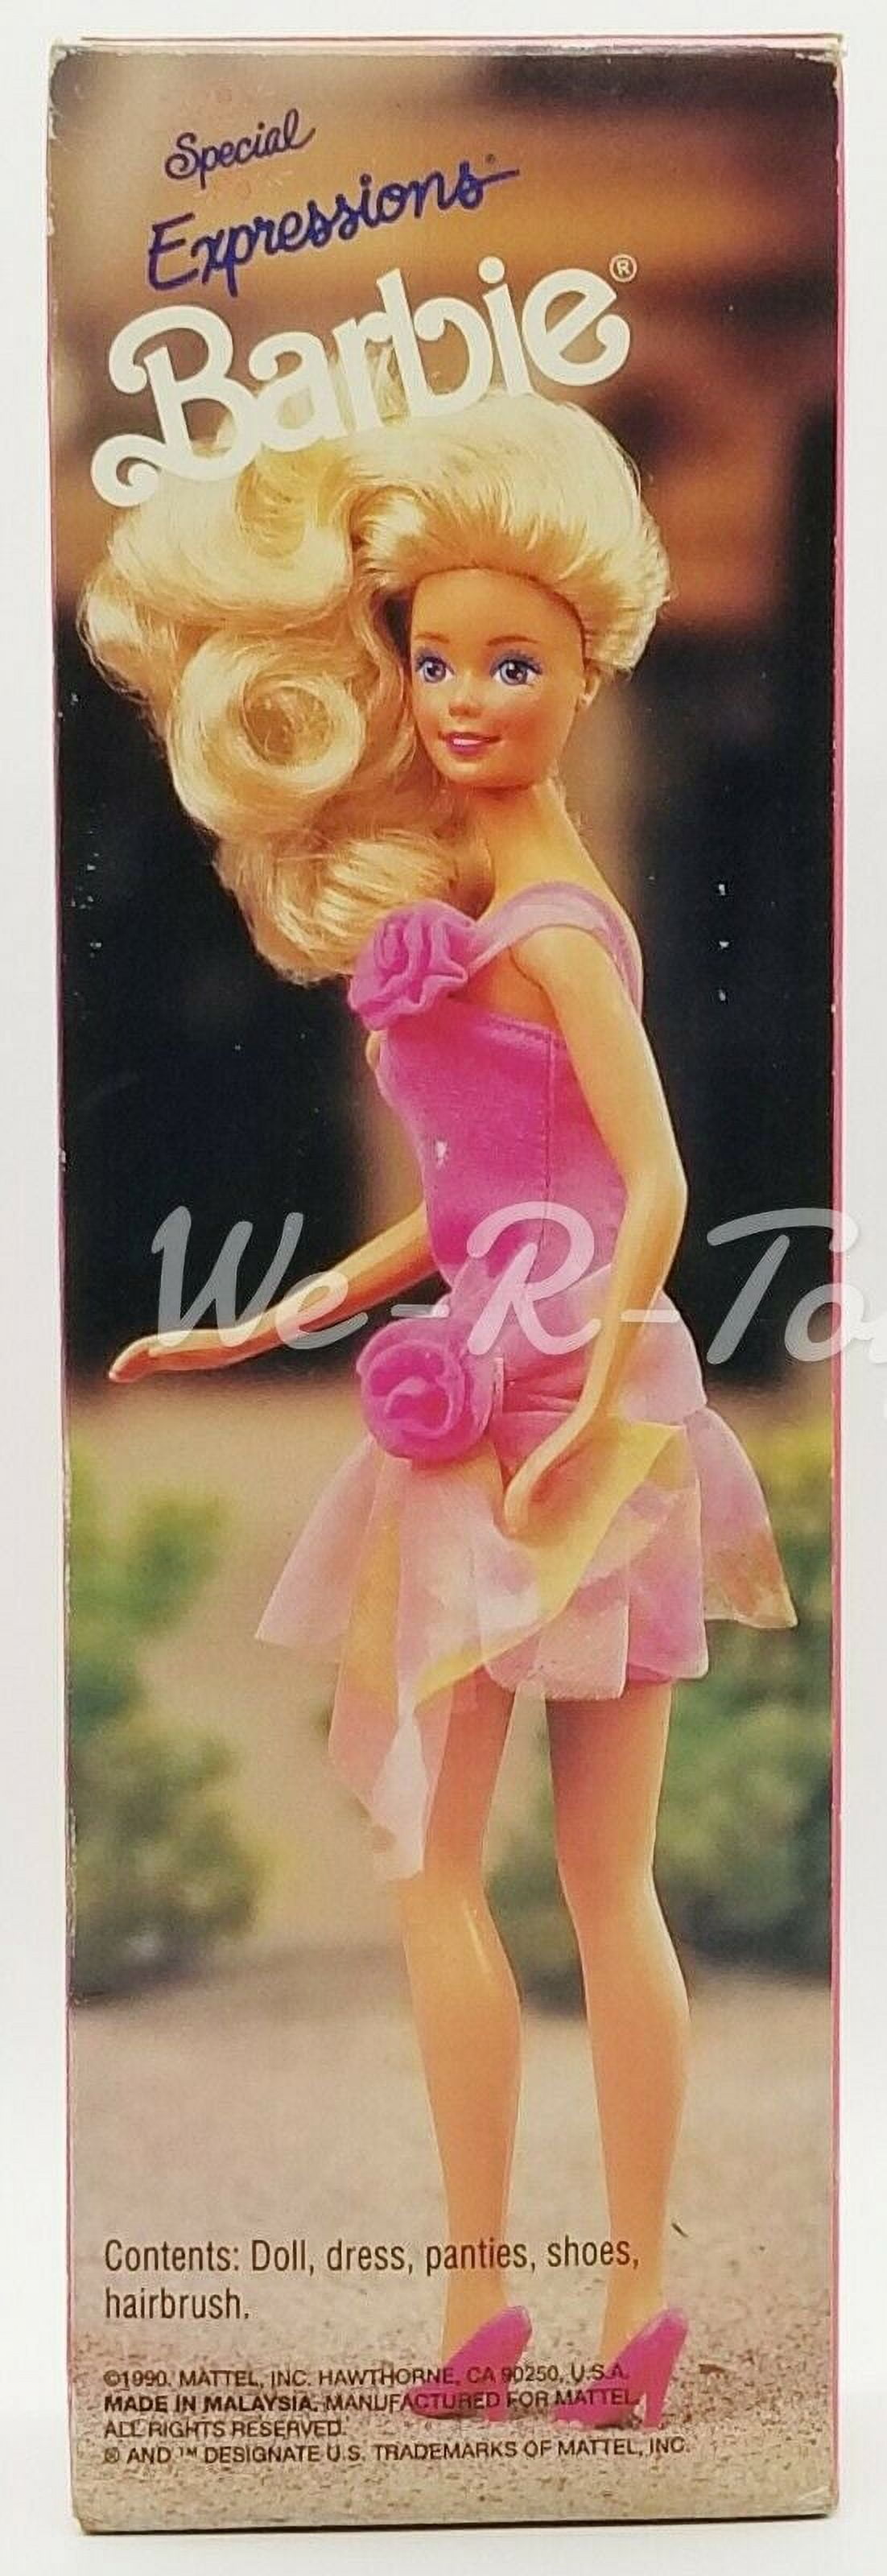 Woolworth's Special Edition Special Expressions Barbie Doll